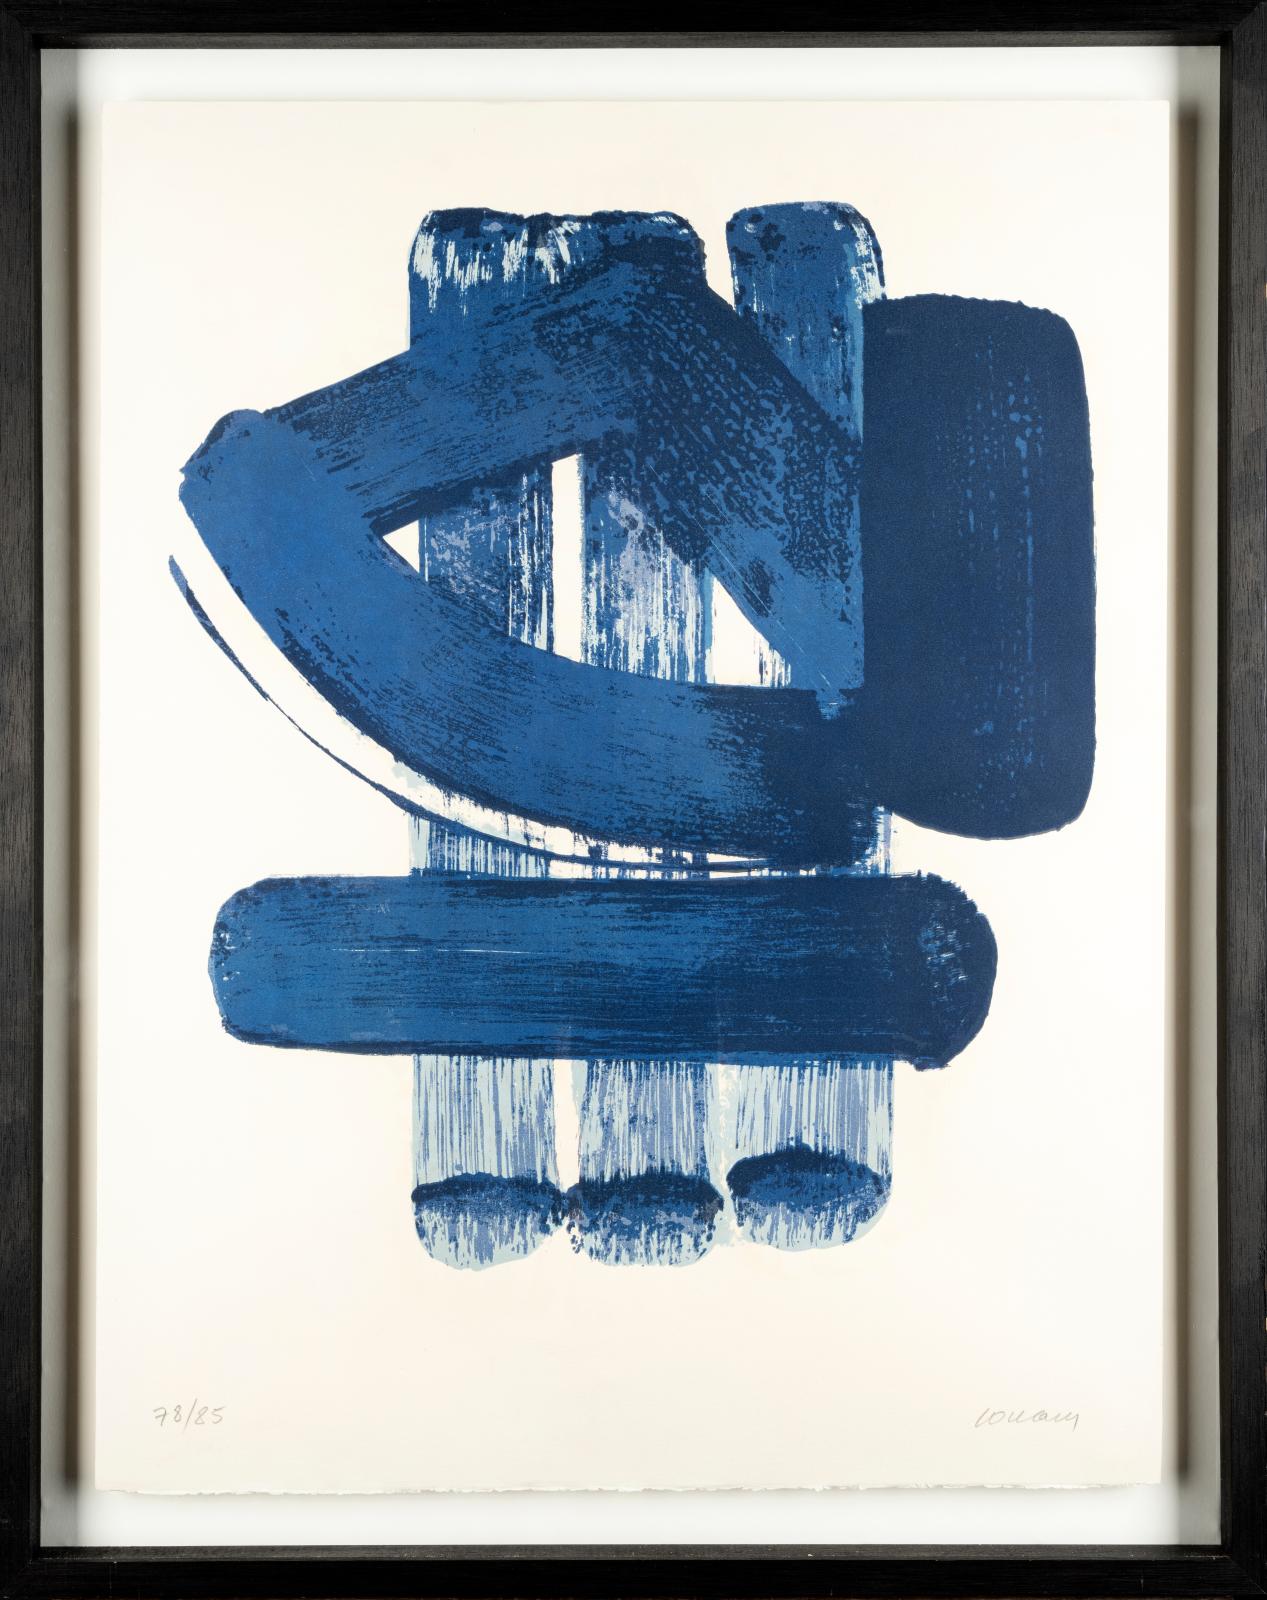 Passion Soulages: The Art of the Print